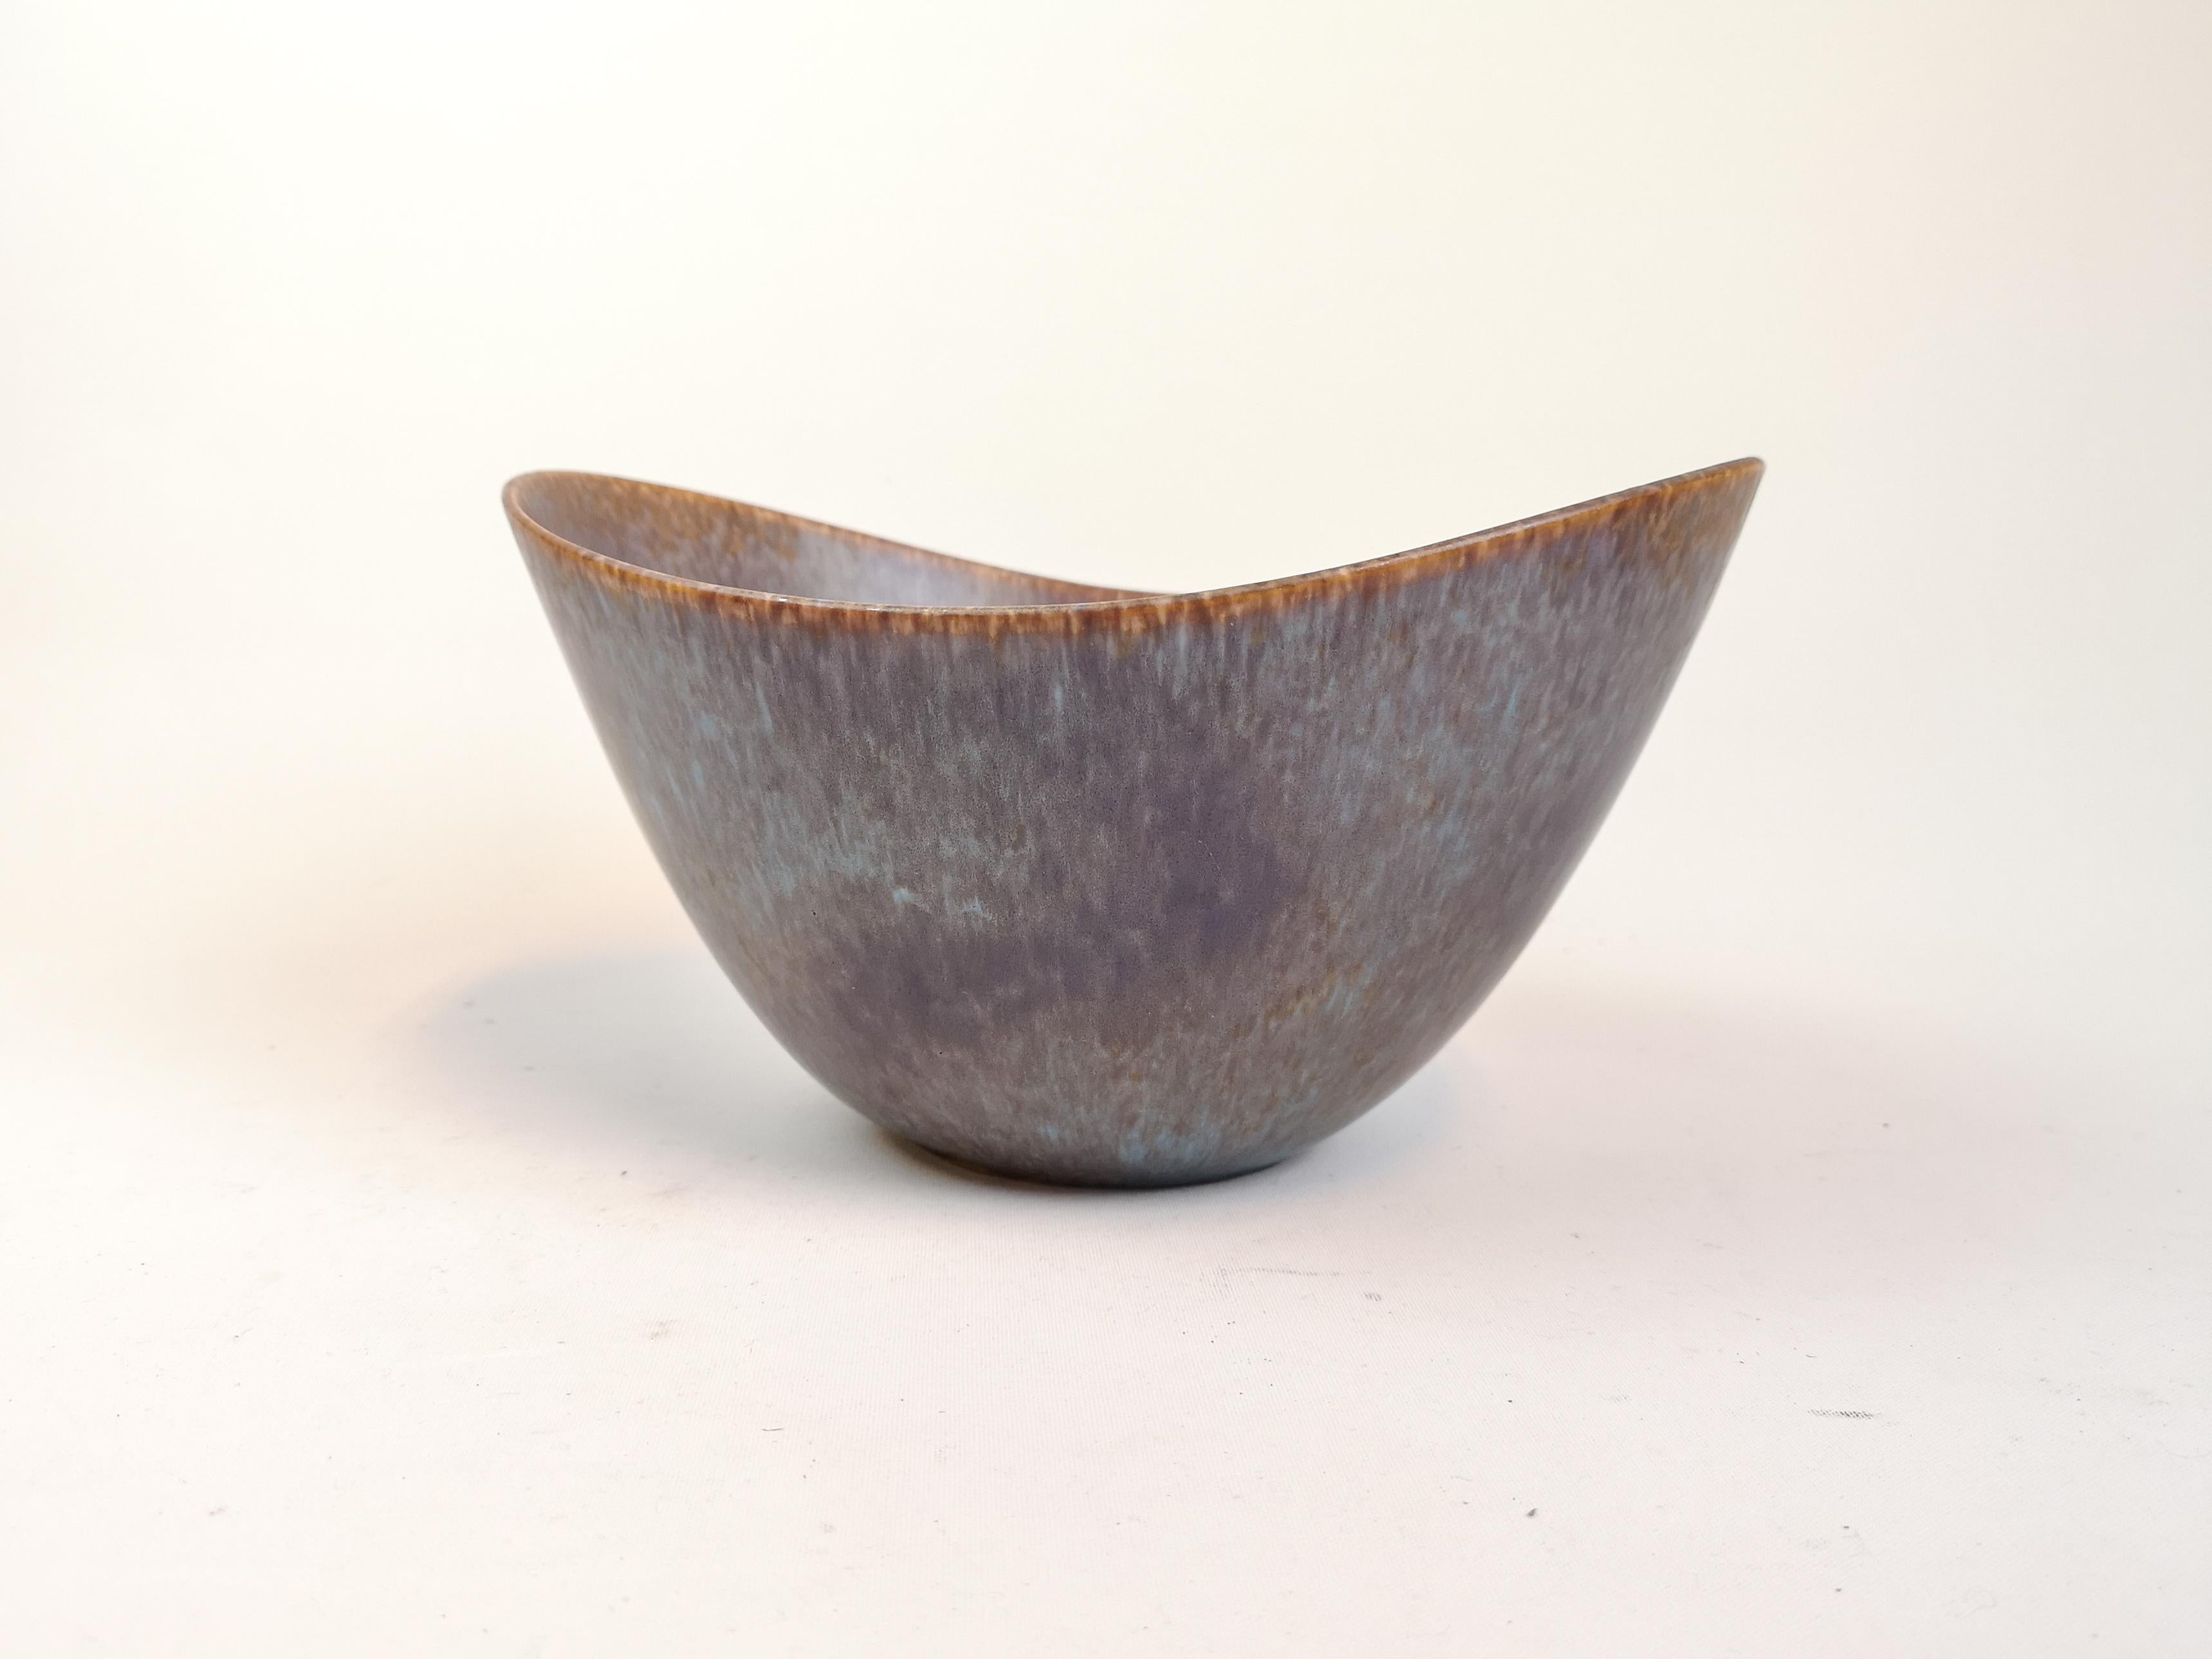 Wonderful largest model of the AXK bowl manufactured in the 1950s at Rörstrand, designed by Gunnar Nylund.
The bowl has a wonderful glaze and it lifts the shape of the bowl to a wonderful object.

Good condition

Measures: H 16 cm x W 27 cm x D